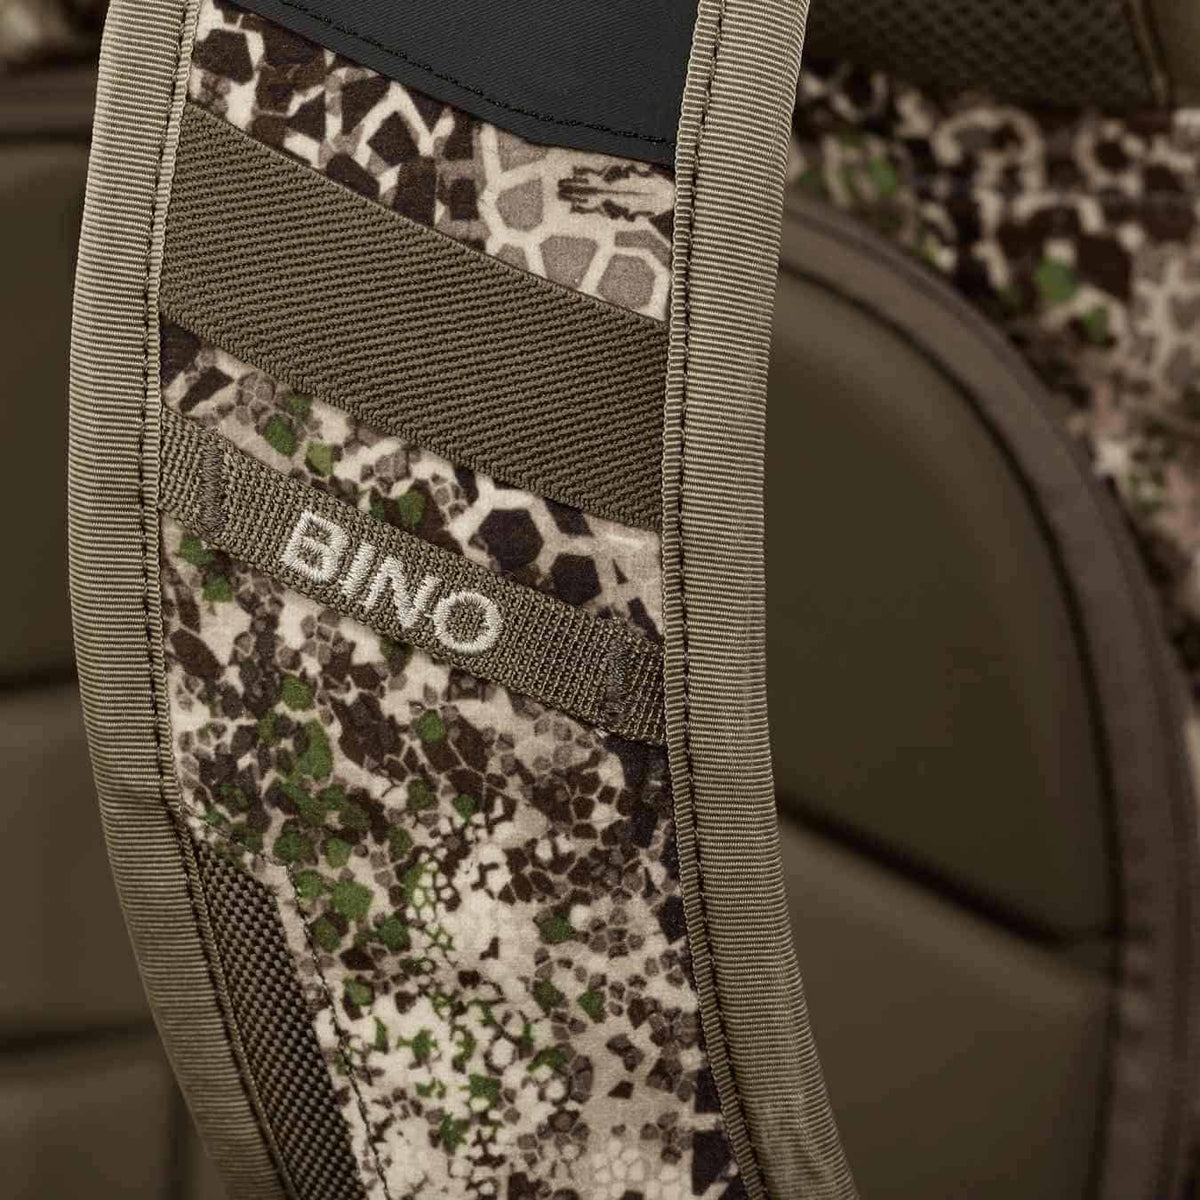 Badlands Packs 2200 Hunting Backpack 2020 Model Approach Camo Back Additional Bino Connect Detail